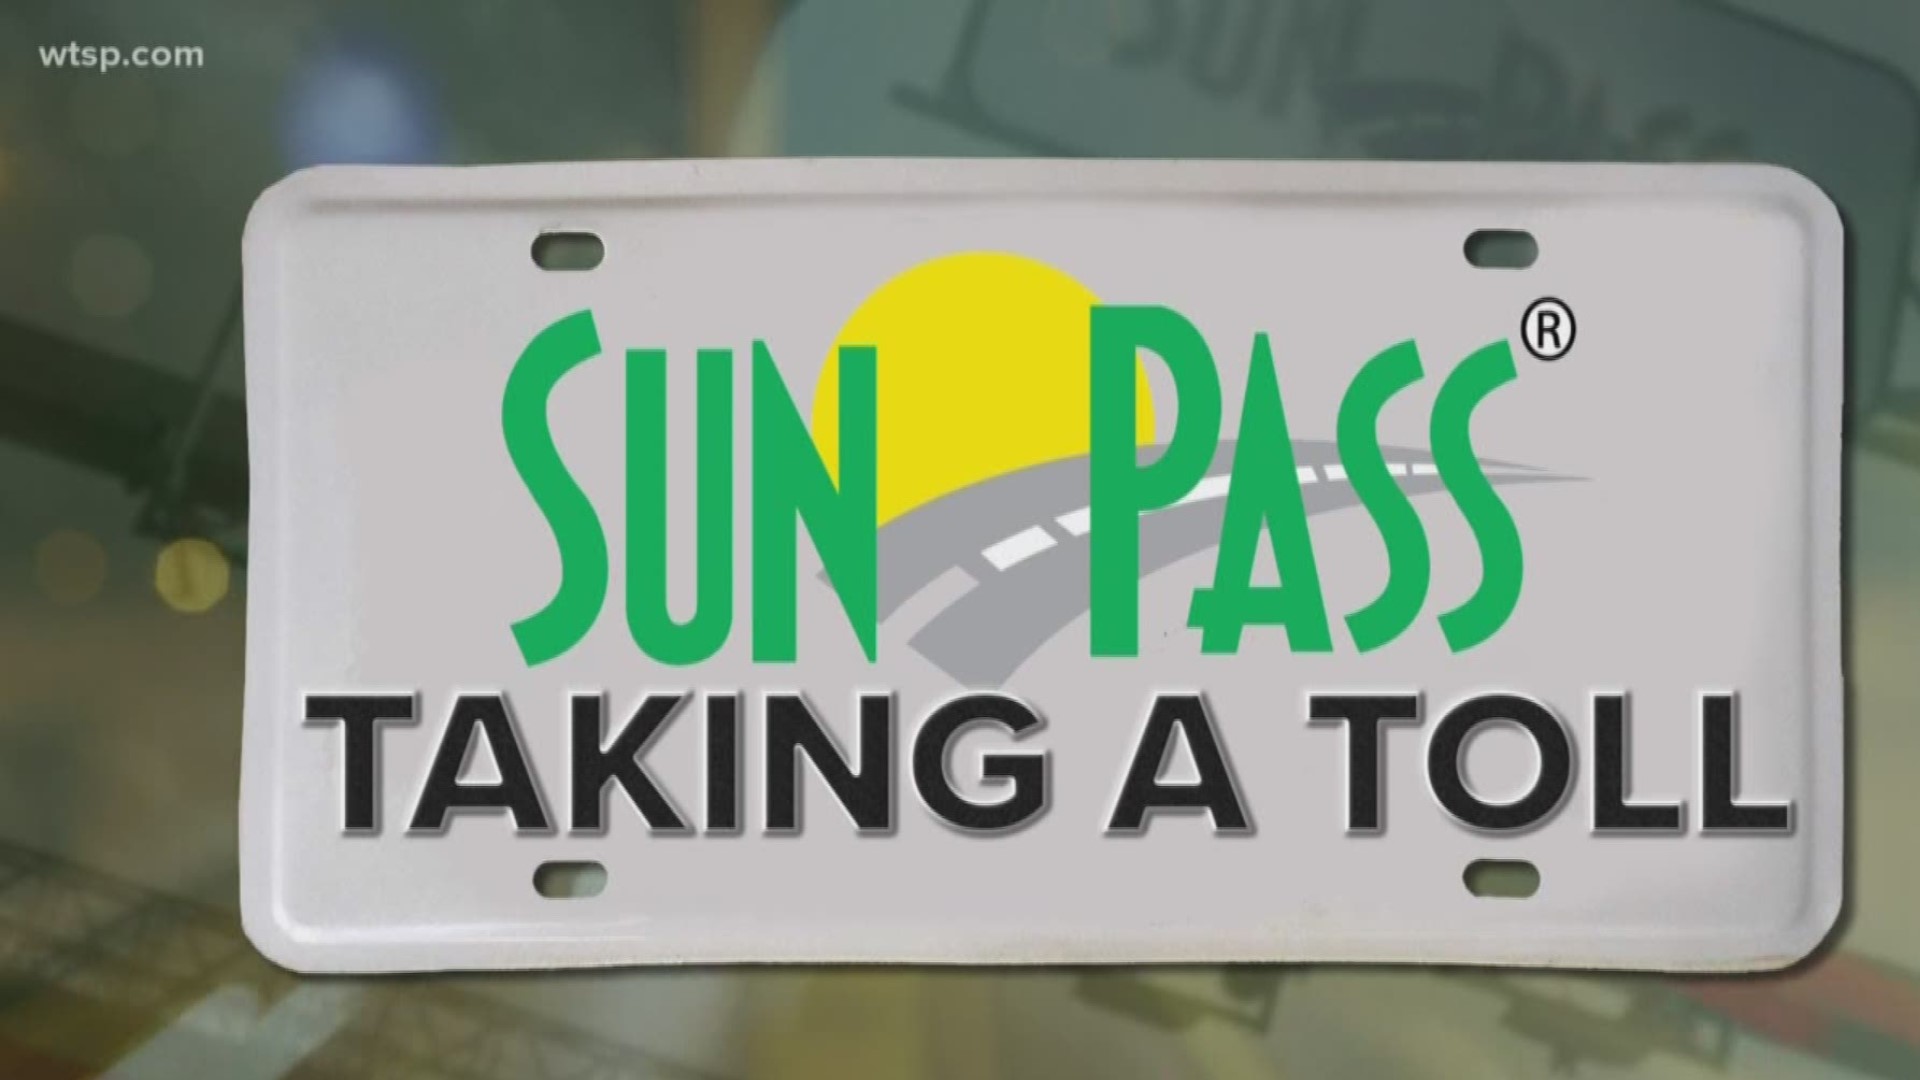 A lot can happen over the course of a year – unless, of course, you're talking about accountability and transparency surrounding Florida's SunPass saga.
One year ago today – Florida shut down its toll billing system for what was supposed to be a six-day outage for maintenance. That's when the train came off the tracks.